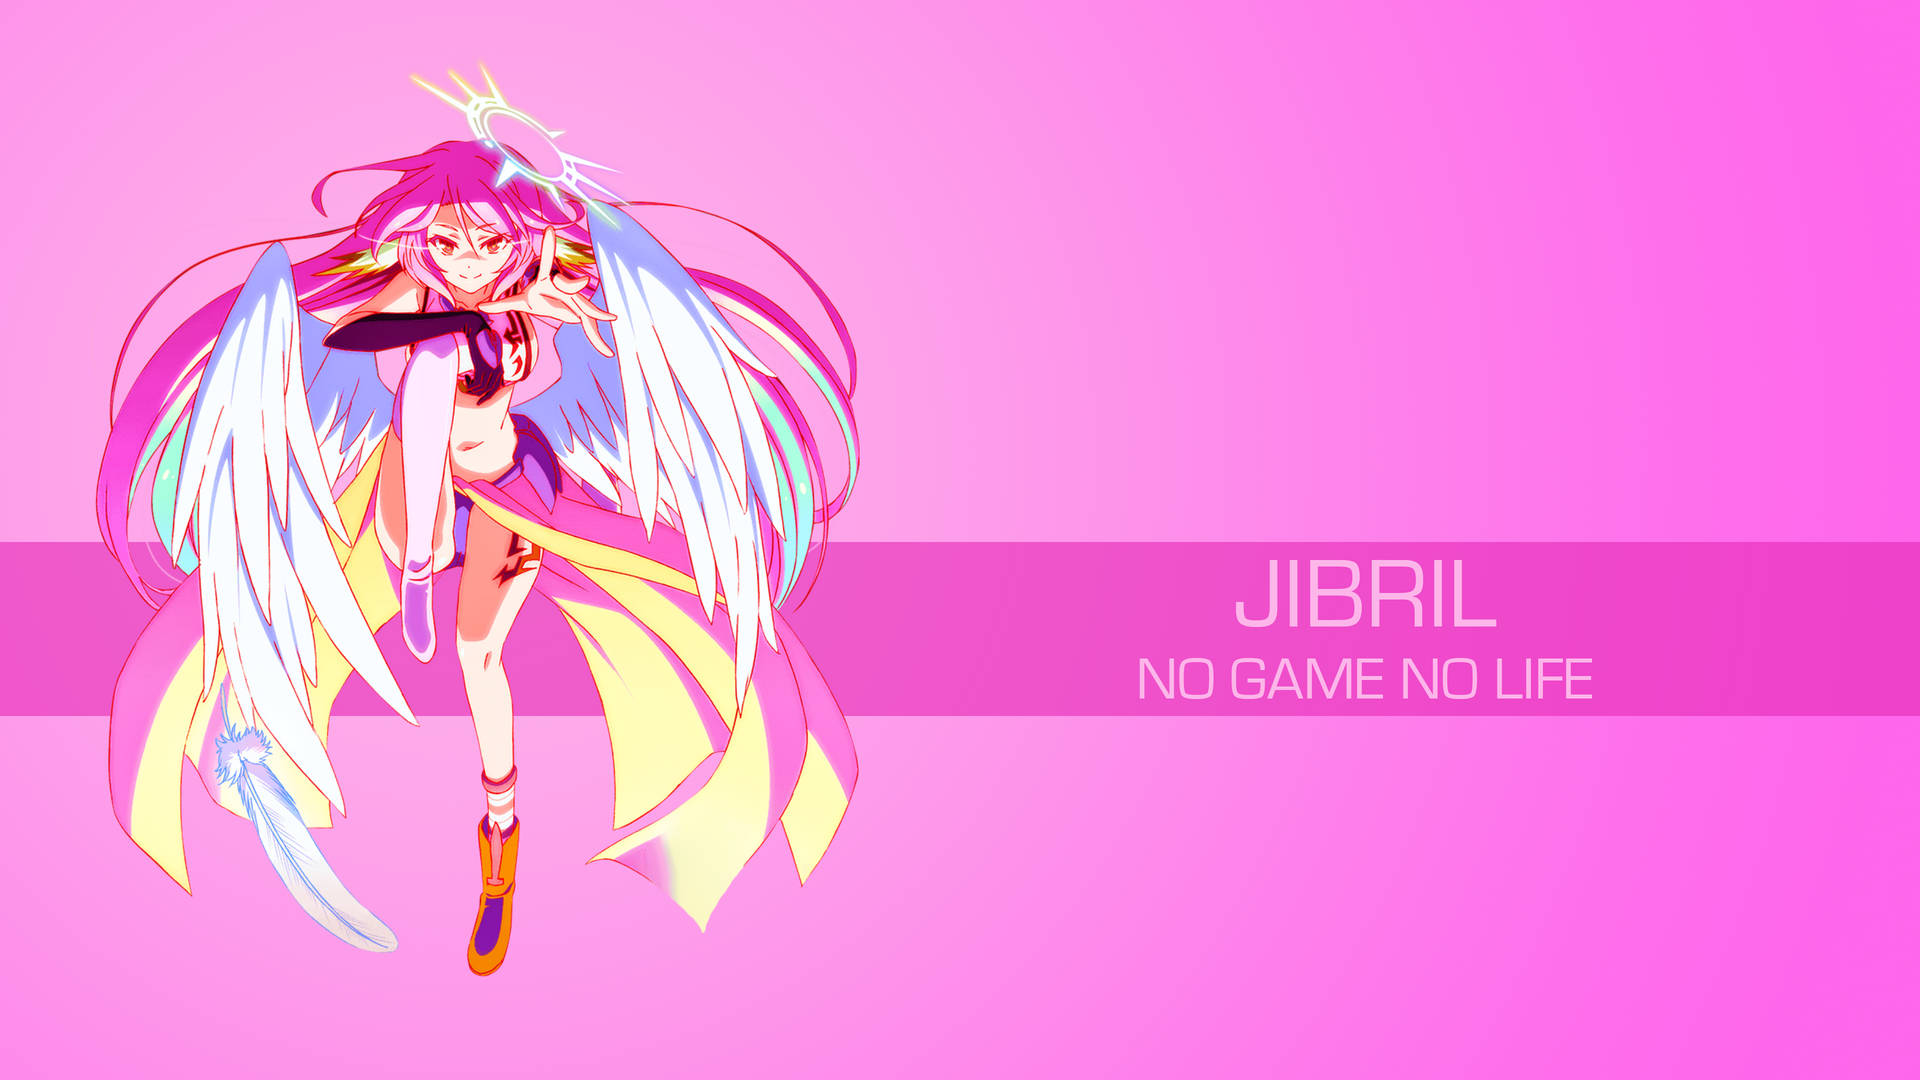 No Game No Life Jibril Poster Background